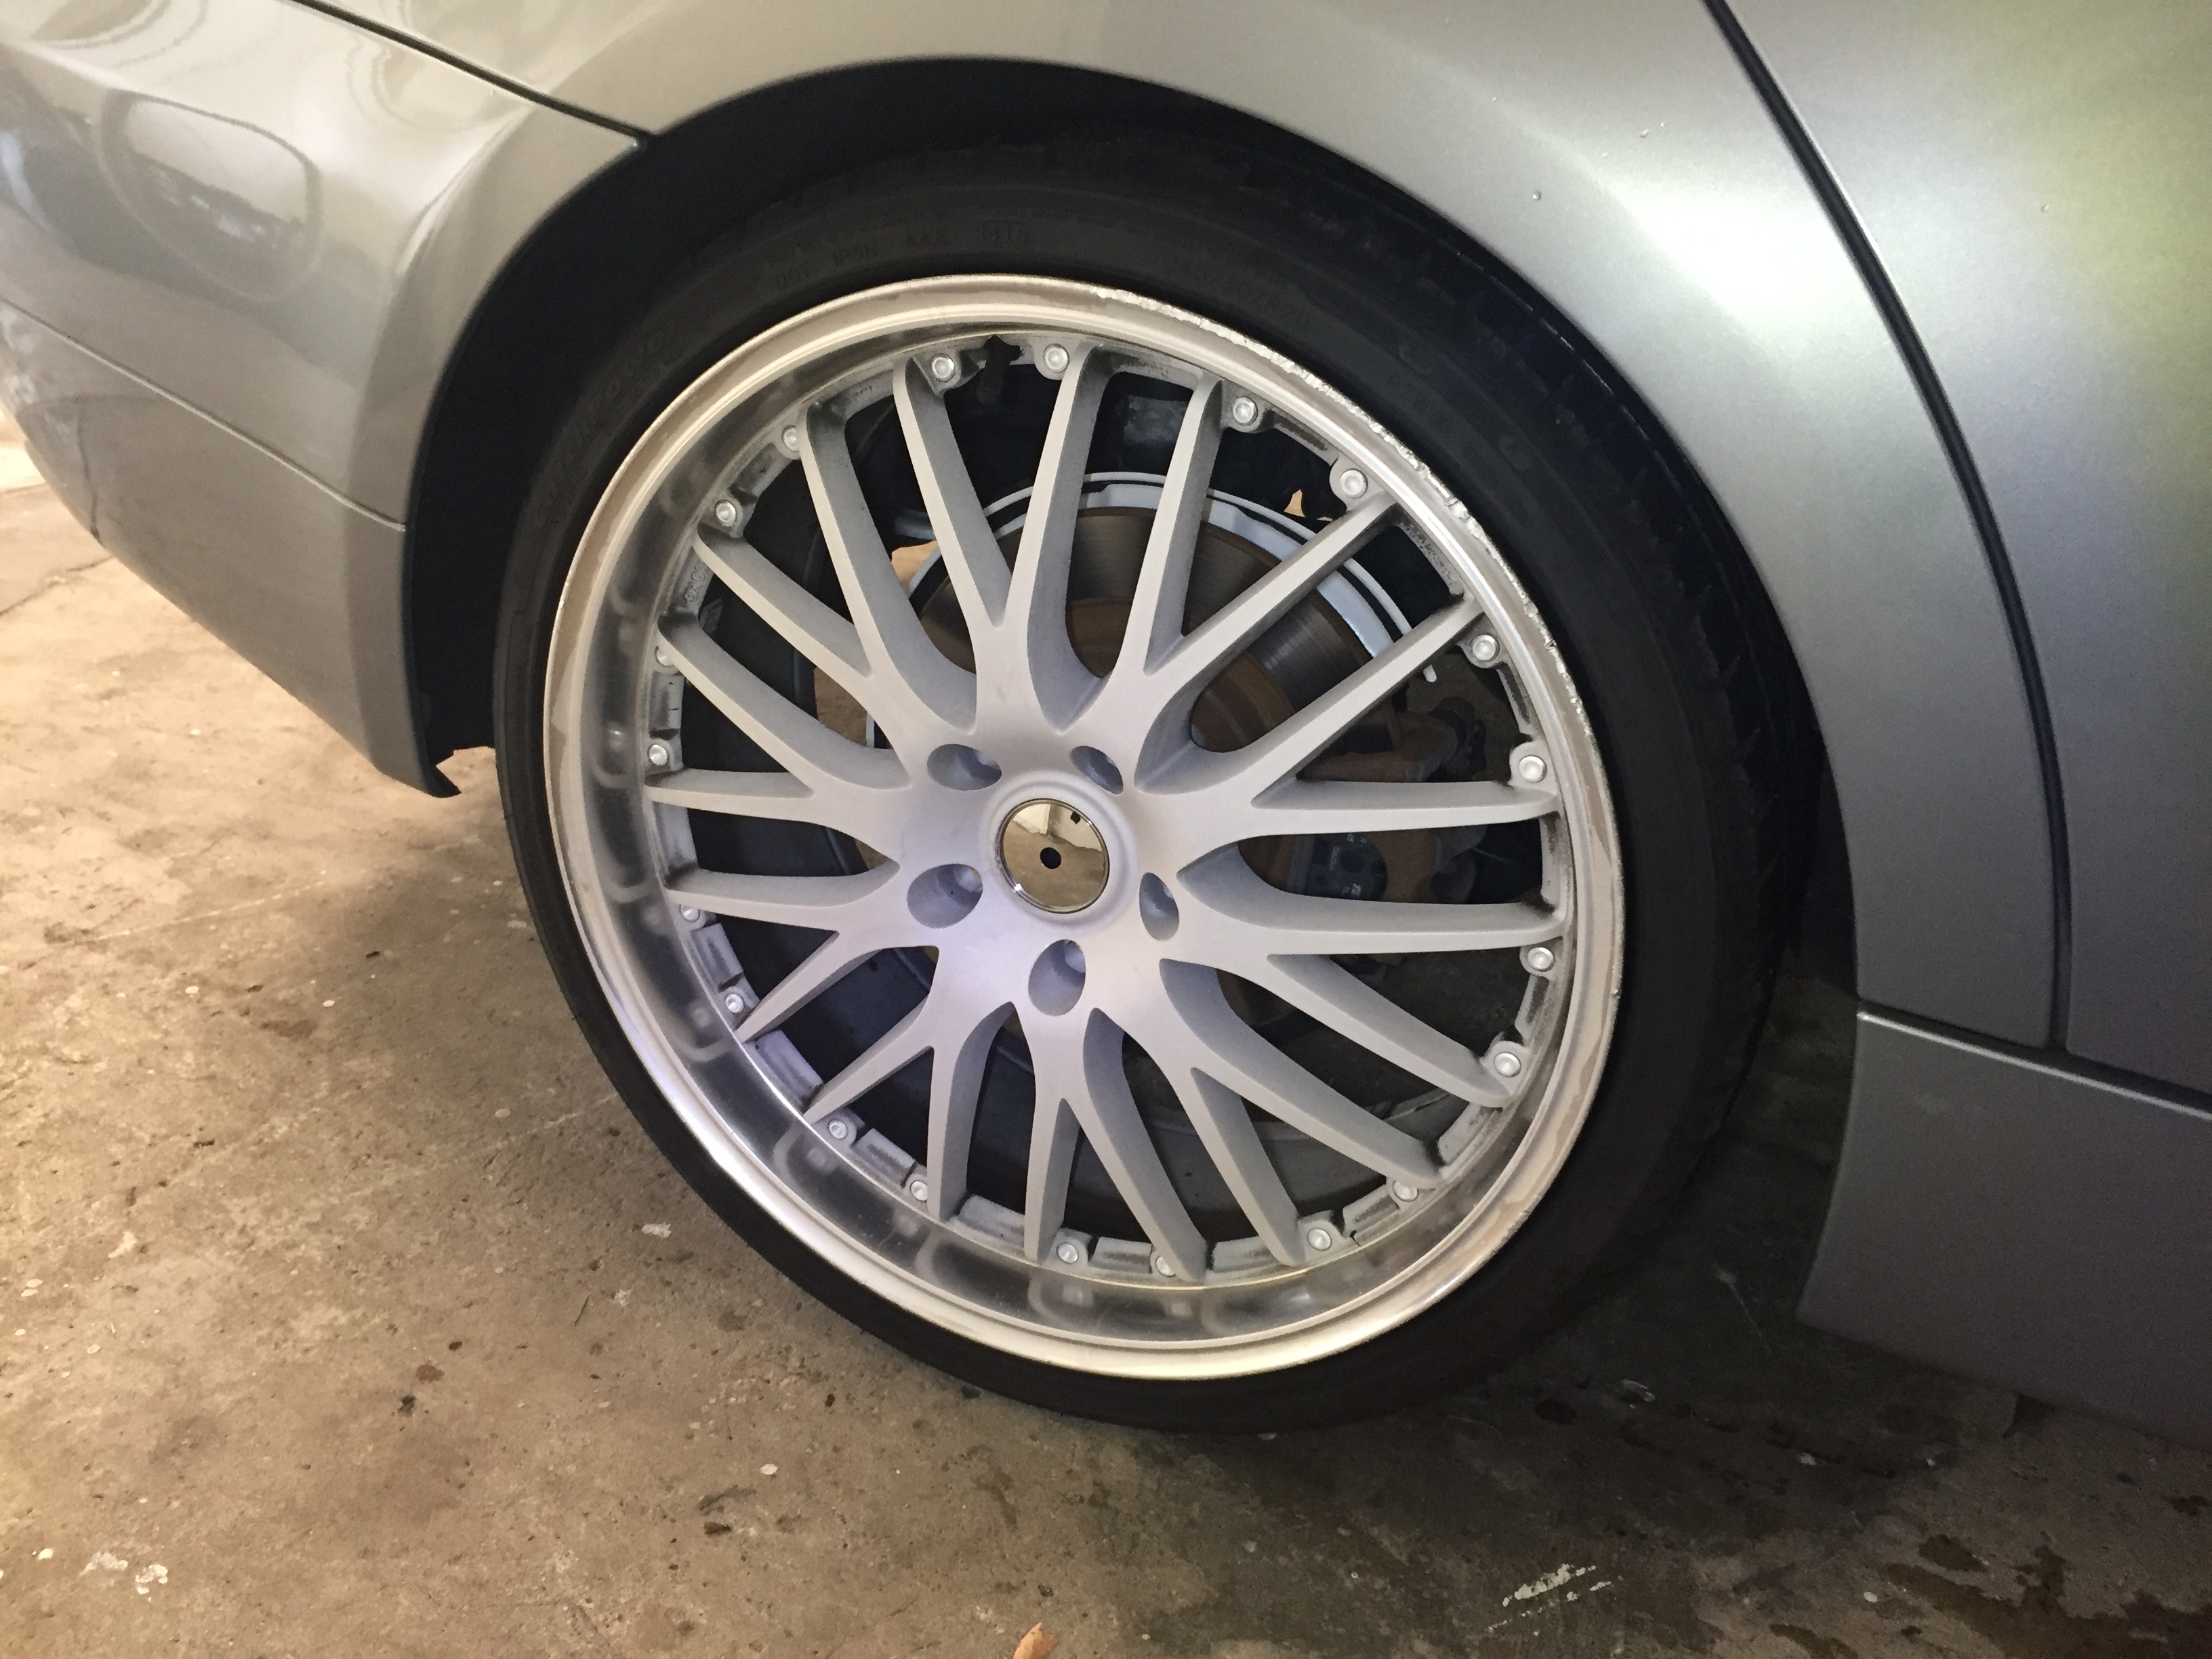 BMW 3 Series 20INCH Wheels and Tyres,90% Tread